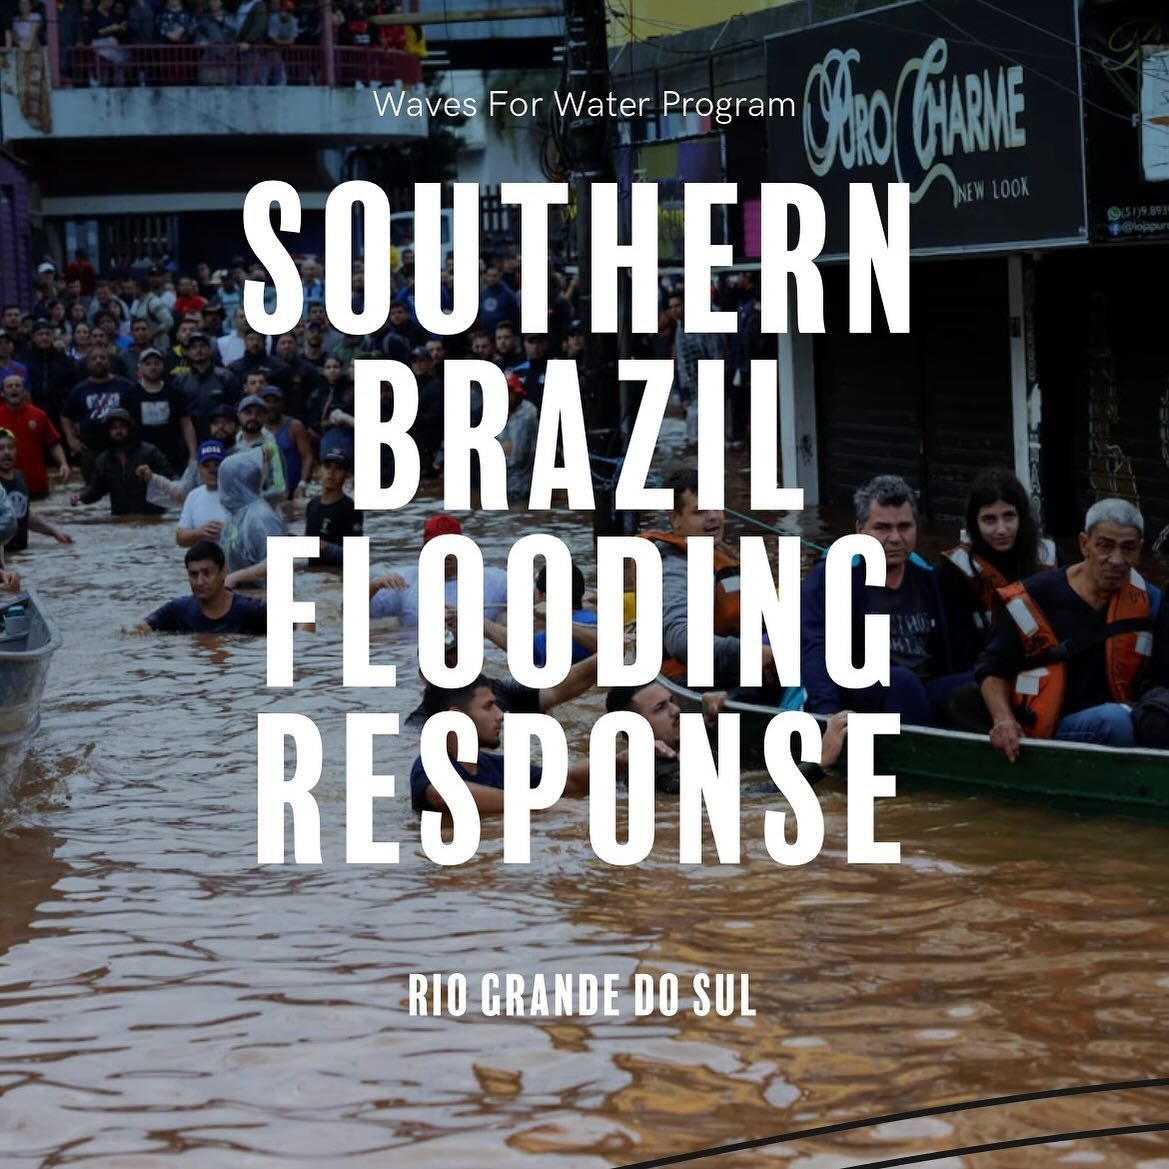 Floods in Southern Brazil are devastating. Waves For Water is launching a disaster relief initiative to provide access to safe drinking water. Please click the link in my bio to donate. @wavesforwater